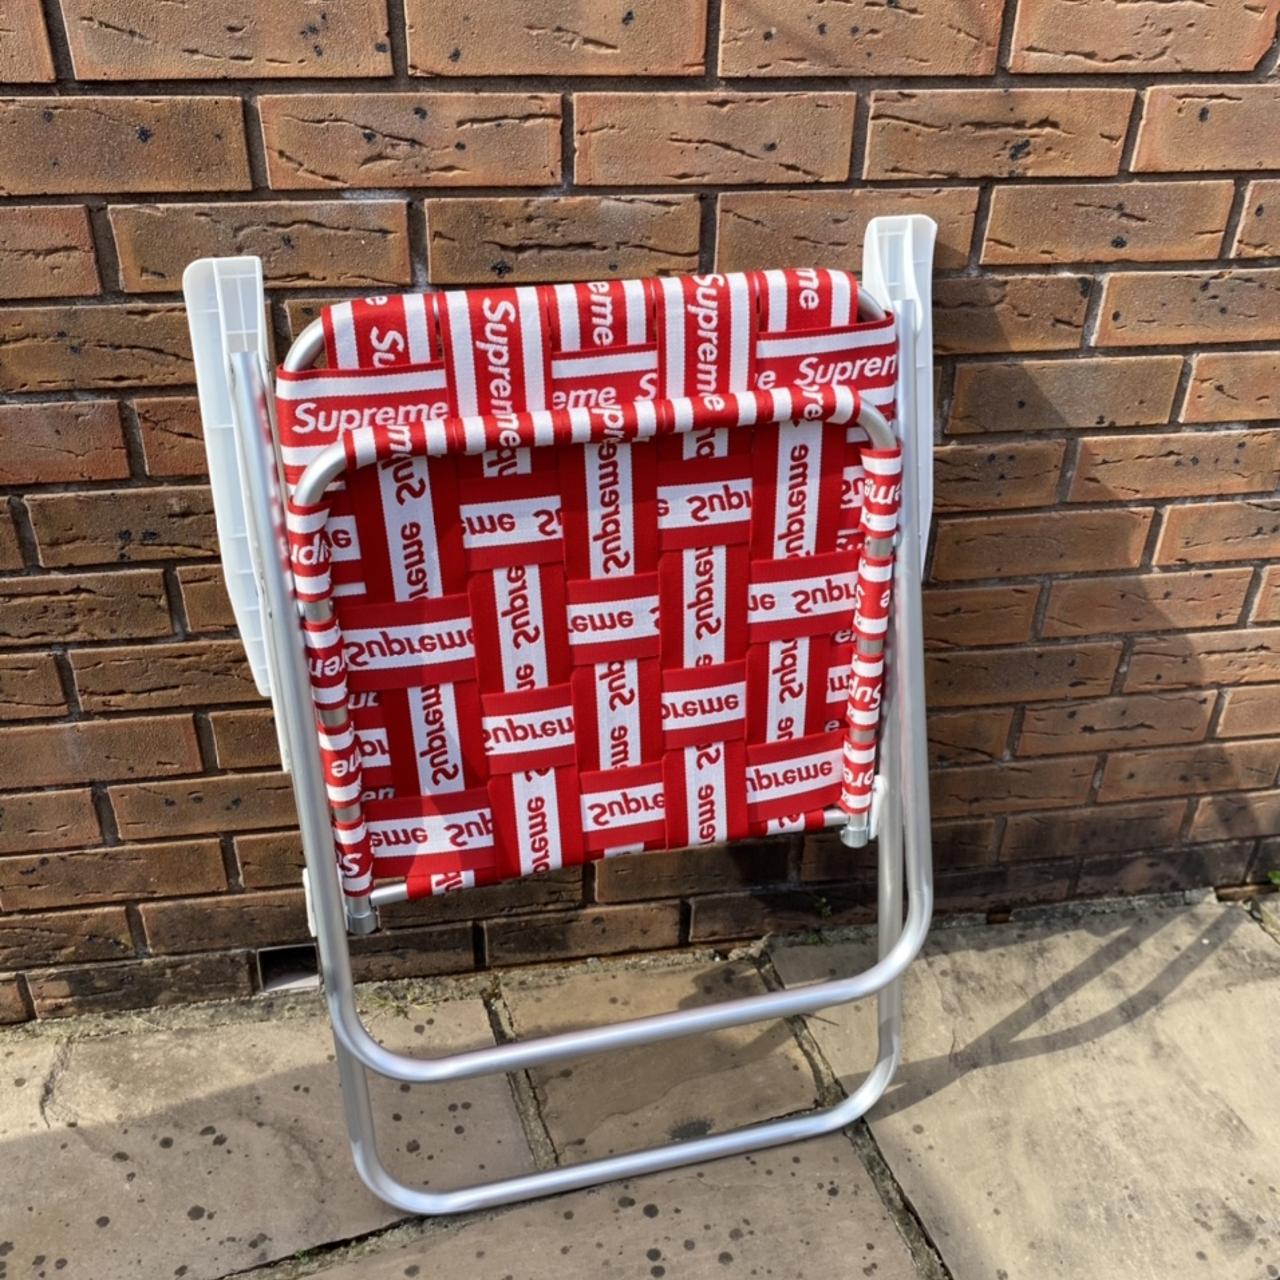 Supreme Lawn Chair Brand New✓ £110💰 Open To... - Depop